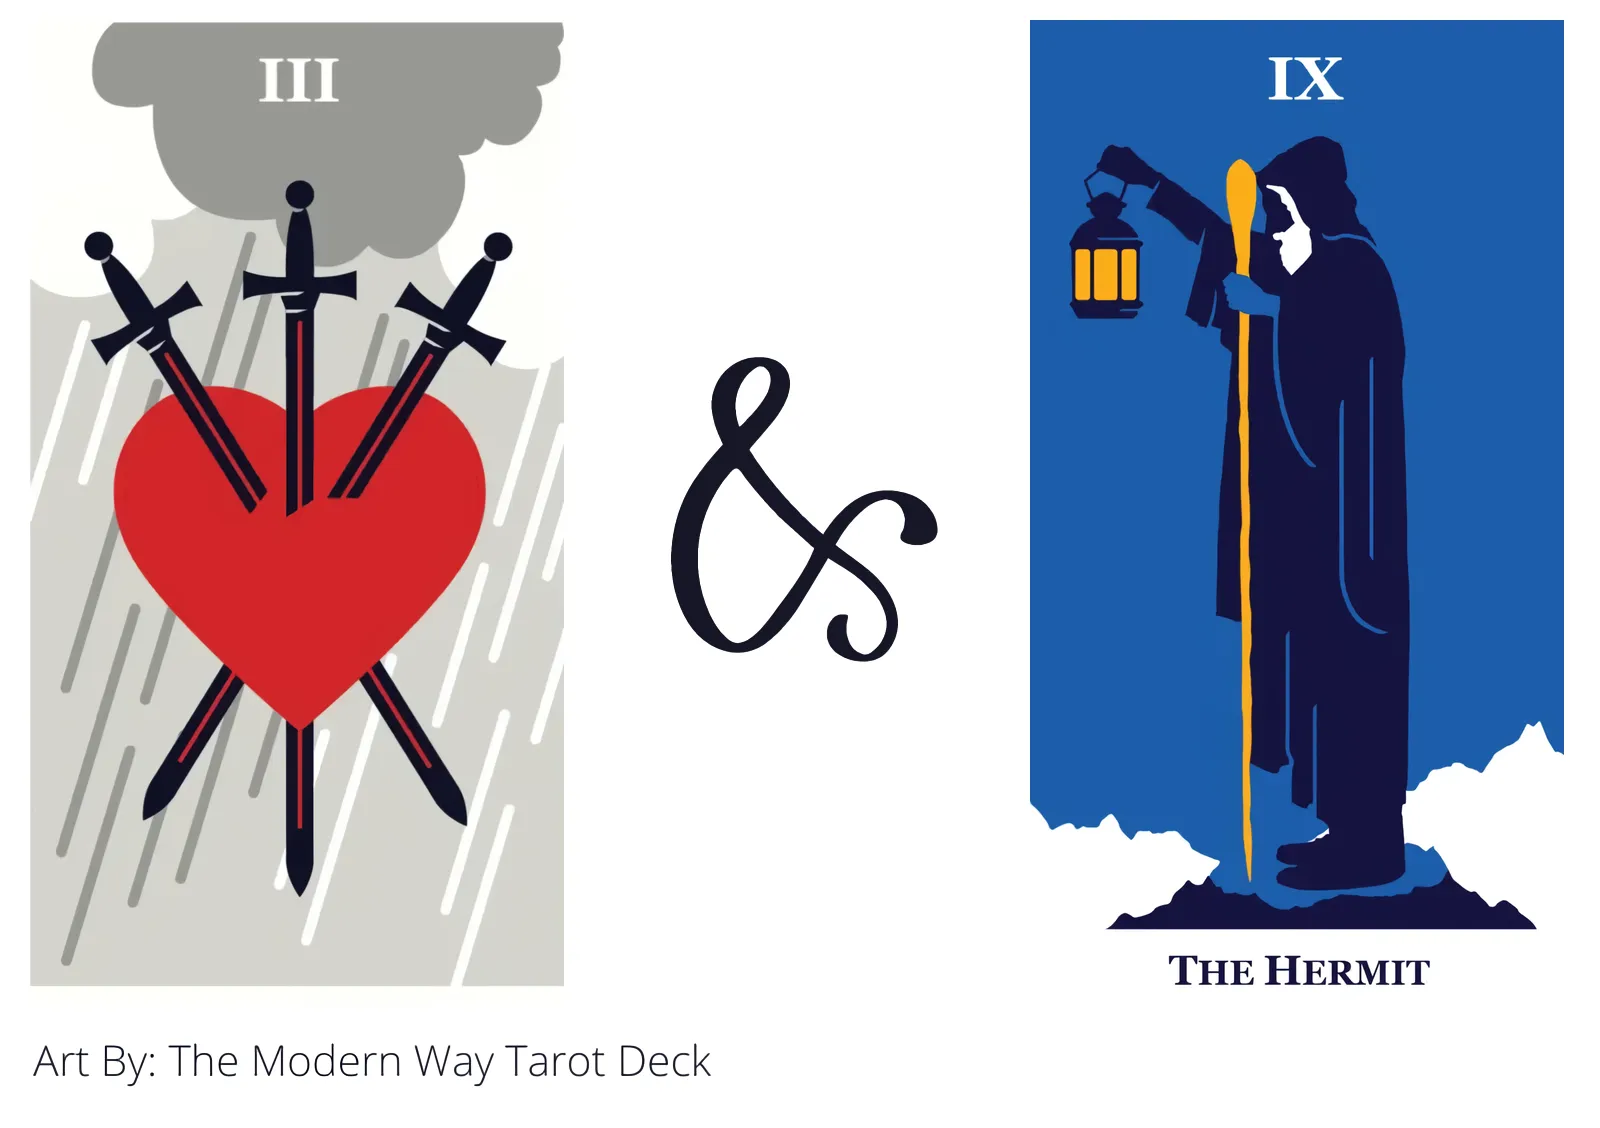 three of swords and the hermit tarot cards together